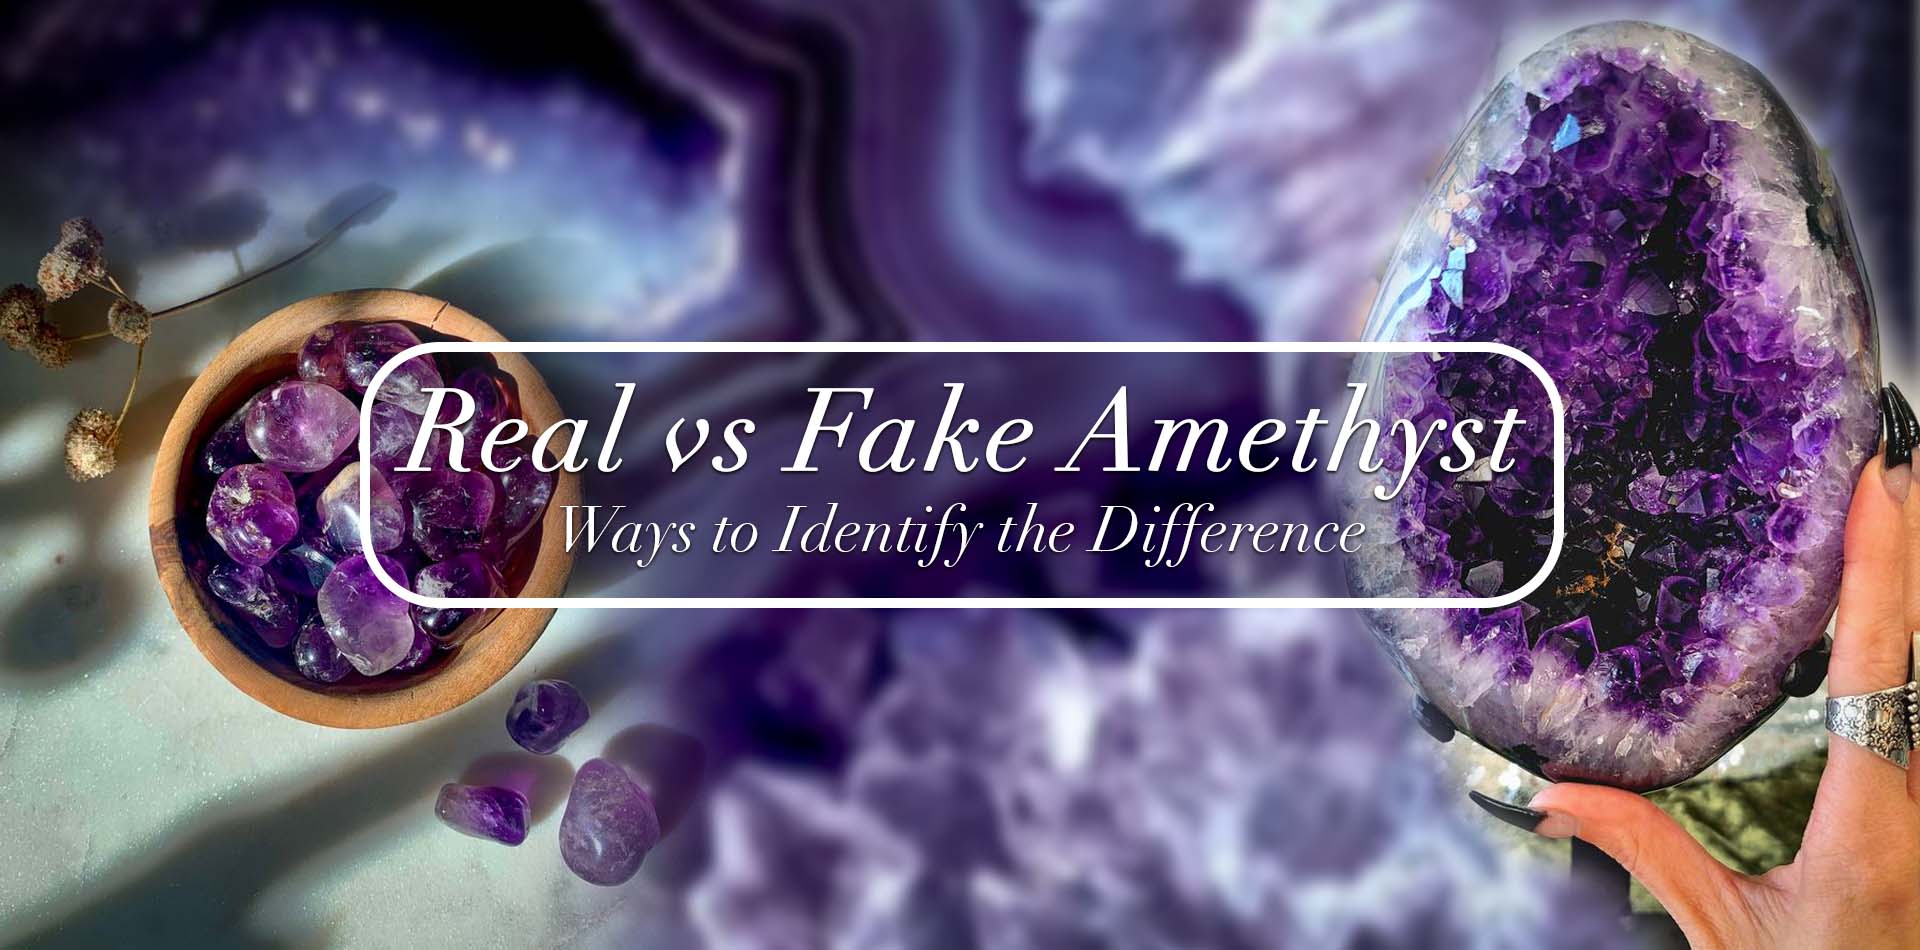 Real vs Fake Amethyst - Ways to Identify the Differences